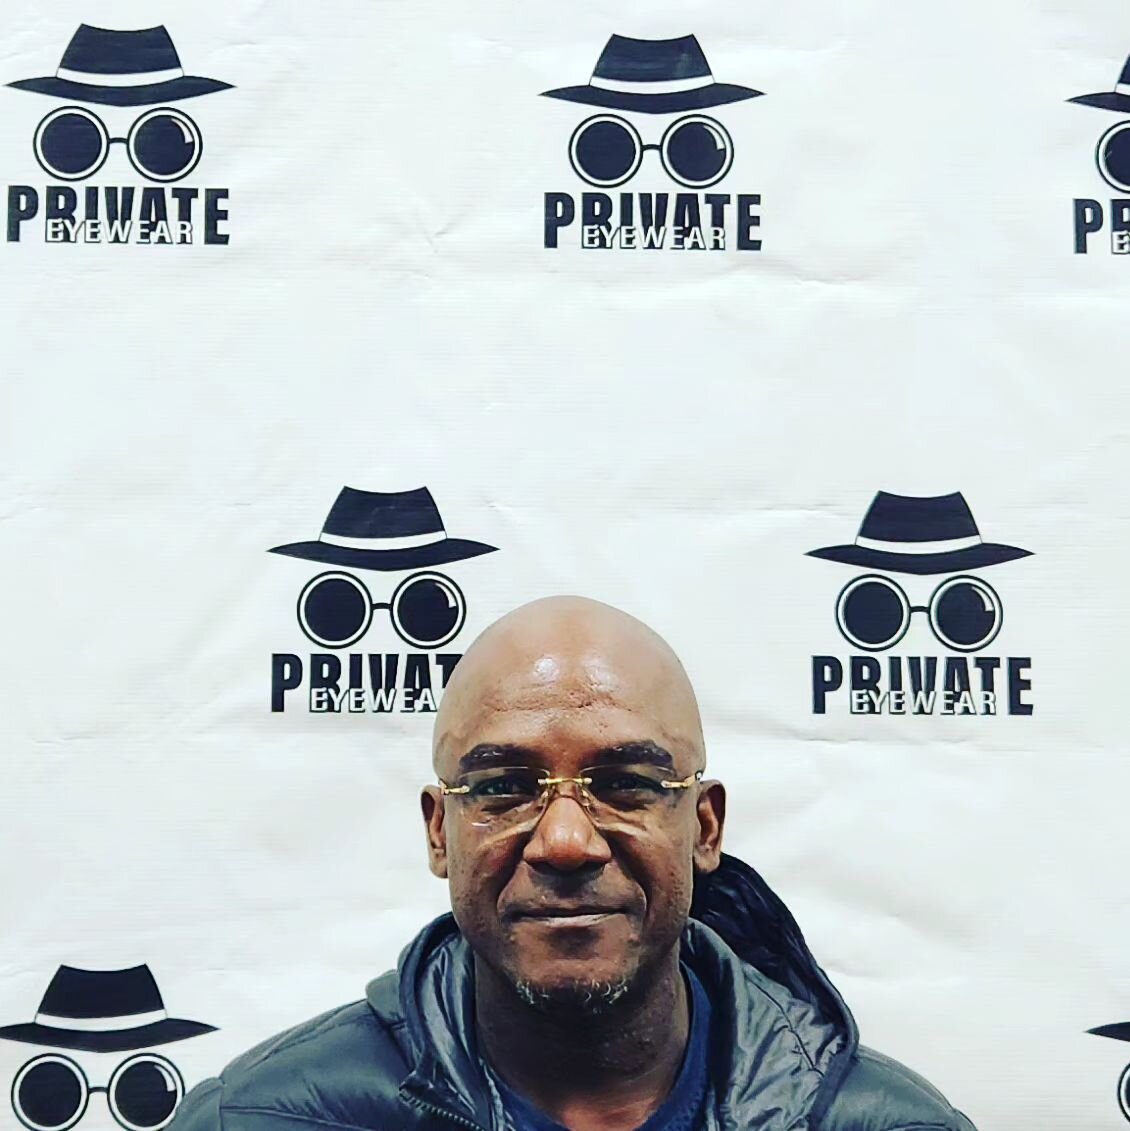 Another happy client.
Let us help you in ways your old optical would not 💪
#watchout #vision #youseeme #imagine #weloveourclients #privateeyewear #cantstopme #jerseycitystrong #newarkishappening #rimless